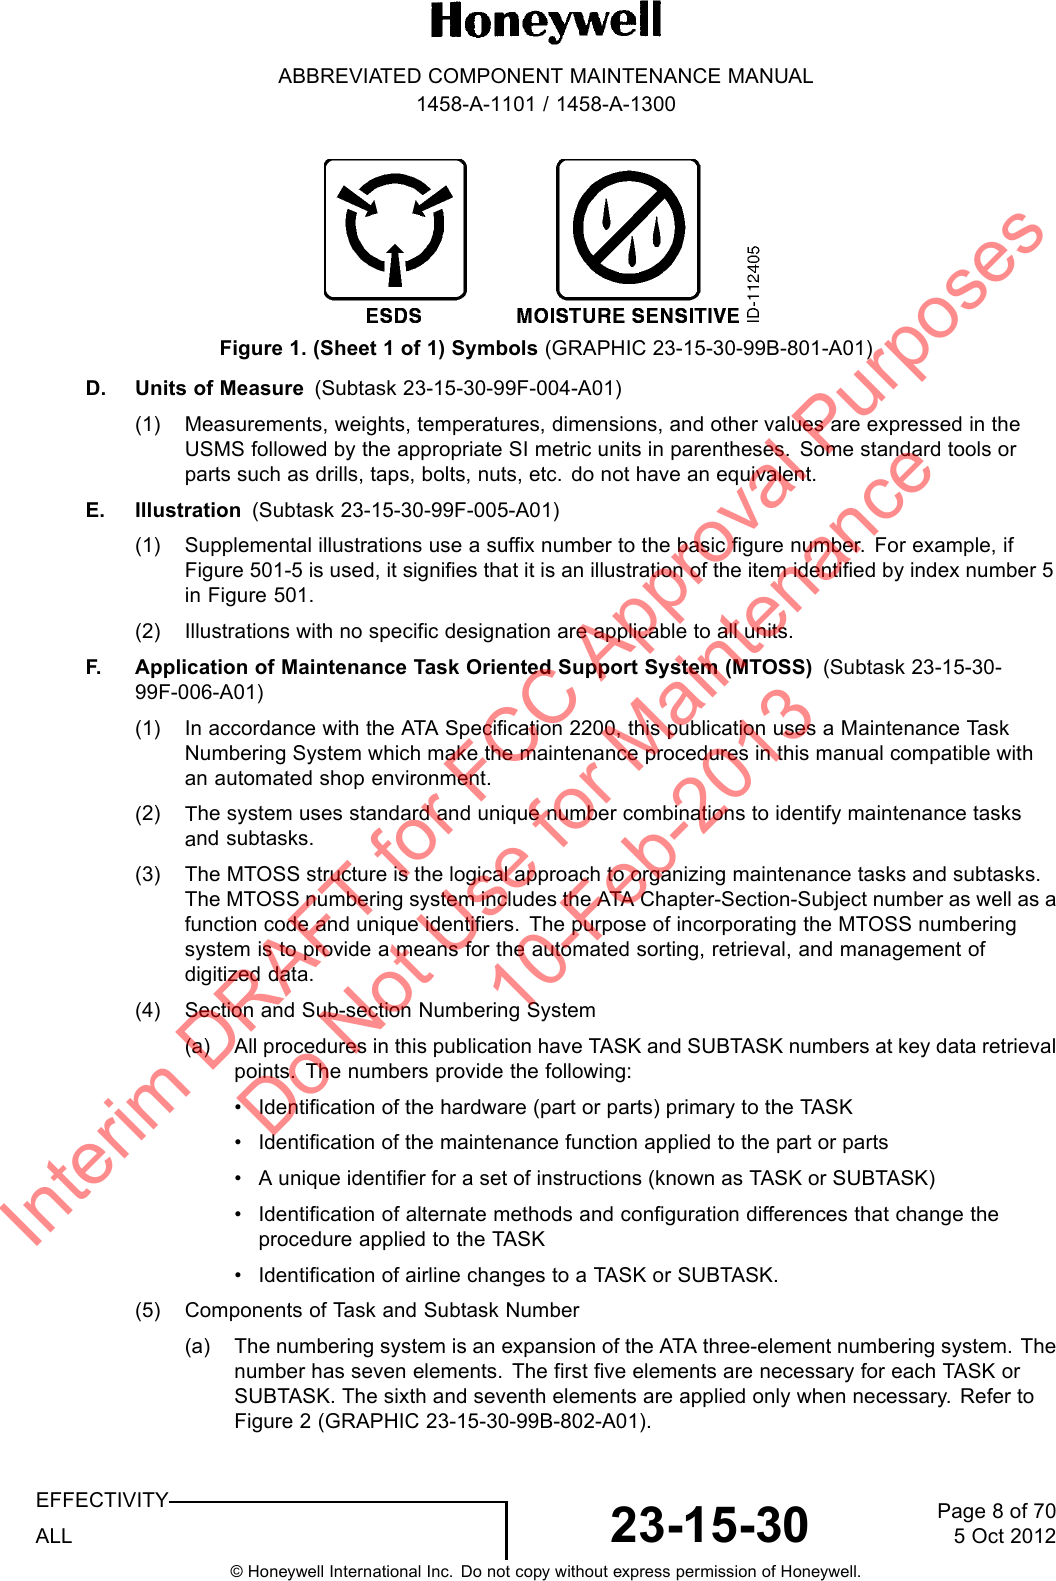 ABBREVIATED COMPONENT MAINTENANCE MANUAL1458-A-1101 / 1458-A-1300Figure 1. (Sheet 1 of 1) Symbols (GRAPHIC 23-15-30-99B-801-A01)D. Units of Measure (Subtask 23-15-30-99F-004-A01)(1) Measurements, weights, temperatures, dimensions, and other values are expressed in theUSMS followed by the appropriate SI metric units in parentheses. Some standard tools orparts such as drills, taps, bolts, nuts, etc. do not have an equivalent.E. Illustration (Subtask 23-15-30-99F-005-A01)(1) Supplemental illustrations use a suffix number to the basic figure number. For example, ifFigure 501-5 is used, it signifies that it is an illustration of the item identified by index number 5in Figure 501.(2) Illustrations with no specific designation are applicable to all units.F. Application of Maintenance Task Oriented Support System (MTOSS) (Subtask 23-15-30-99F-006-A01)(1) In accordance with the ATA Specification 2200, this publication uses a Maintenance TaskNumbering System which make the maintenance procedures in this manual compatible withan automated shop environment.(2) The system uses standard and unique number combinations to identify maintenance tasksand subtasks.(3) The MTOSS structure is the logical approach to organizing maintenance tasks and subtasks.The MTOSS numbering system includes the ATA Chapter-Section-Subject number as well as afunction code and unique identifiers. The purpose of incorporating the MTOSS numberingsystem is to provide a means for the automated sorting, retrieval, and management ofdigitized data.(4) Section and Sub-section Numbering System(a) All procedures in this publication have TASK and SUBTASK numbers at key data retrievalpoints. The numbers provide the following:• Identification of the hardware (part or parts) primary to the TASK• Identification of the maintenance function applied to the part or parts• A unique identifier for a set of instructions (known as TASK or SUBTASK)• Identification of alternate methods and configuration differences that change theprocedure applied to the TASK• Identification of airline changes to a TASK or SUBTASK.(5) Components of Task and Subtask Number(a) The numbering system is an expansion of the ATA three-element numbering system. Thenumber has seven elements. The first five elements are necessary for each TASK orSUBTASK. The sixth and seventh elements are applied only when necessary. Refer toFigure 2 (GRAPHIC 23-15-30-99B-802-A01).EFFECTIVITYALL 23-15-30 Page 8 of 705 Oct 2012© Honeywell International Inc. Do not copy without express permission of Honeywell.Interim DRAFT for FCC Approval Purposes Do Not Use for Maintenance 10-Feb-2013